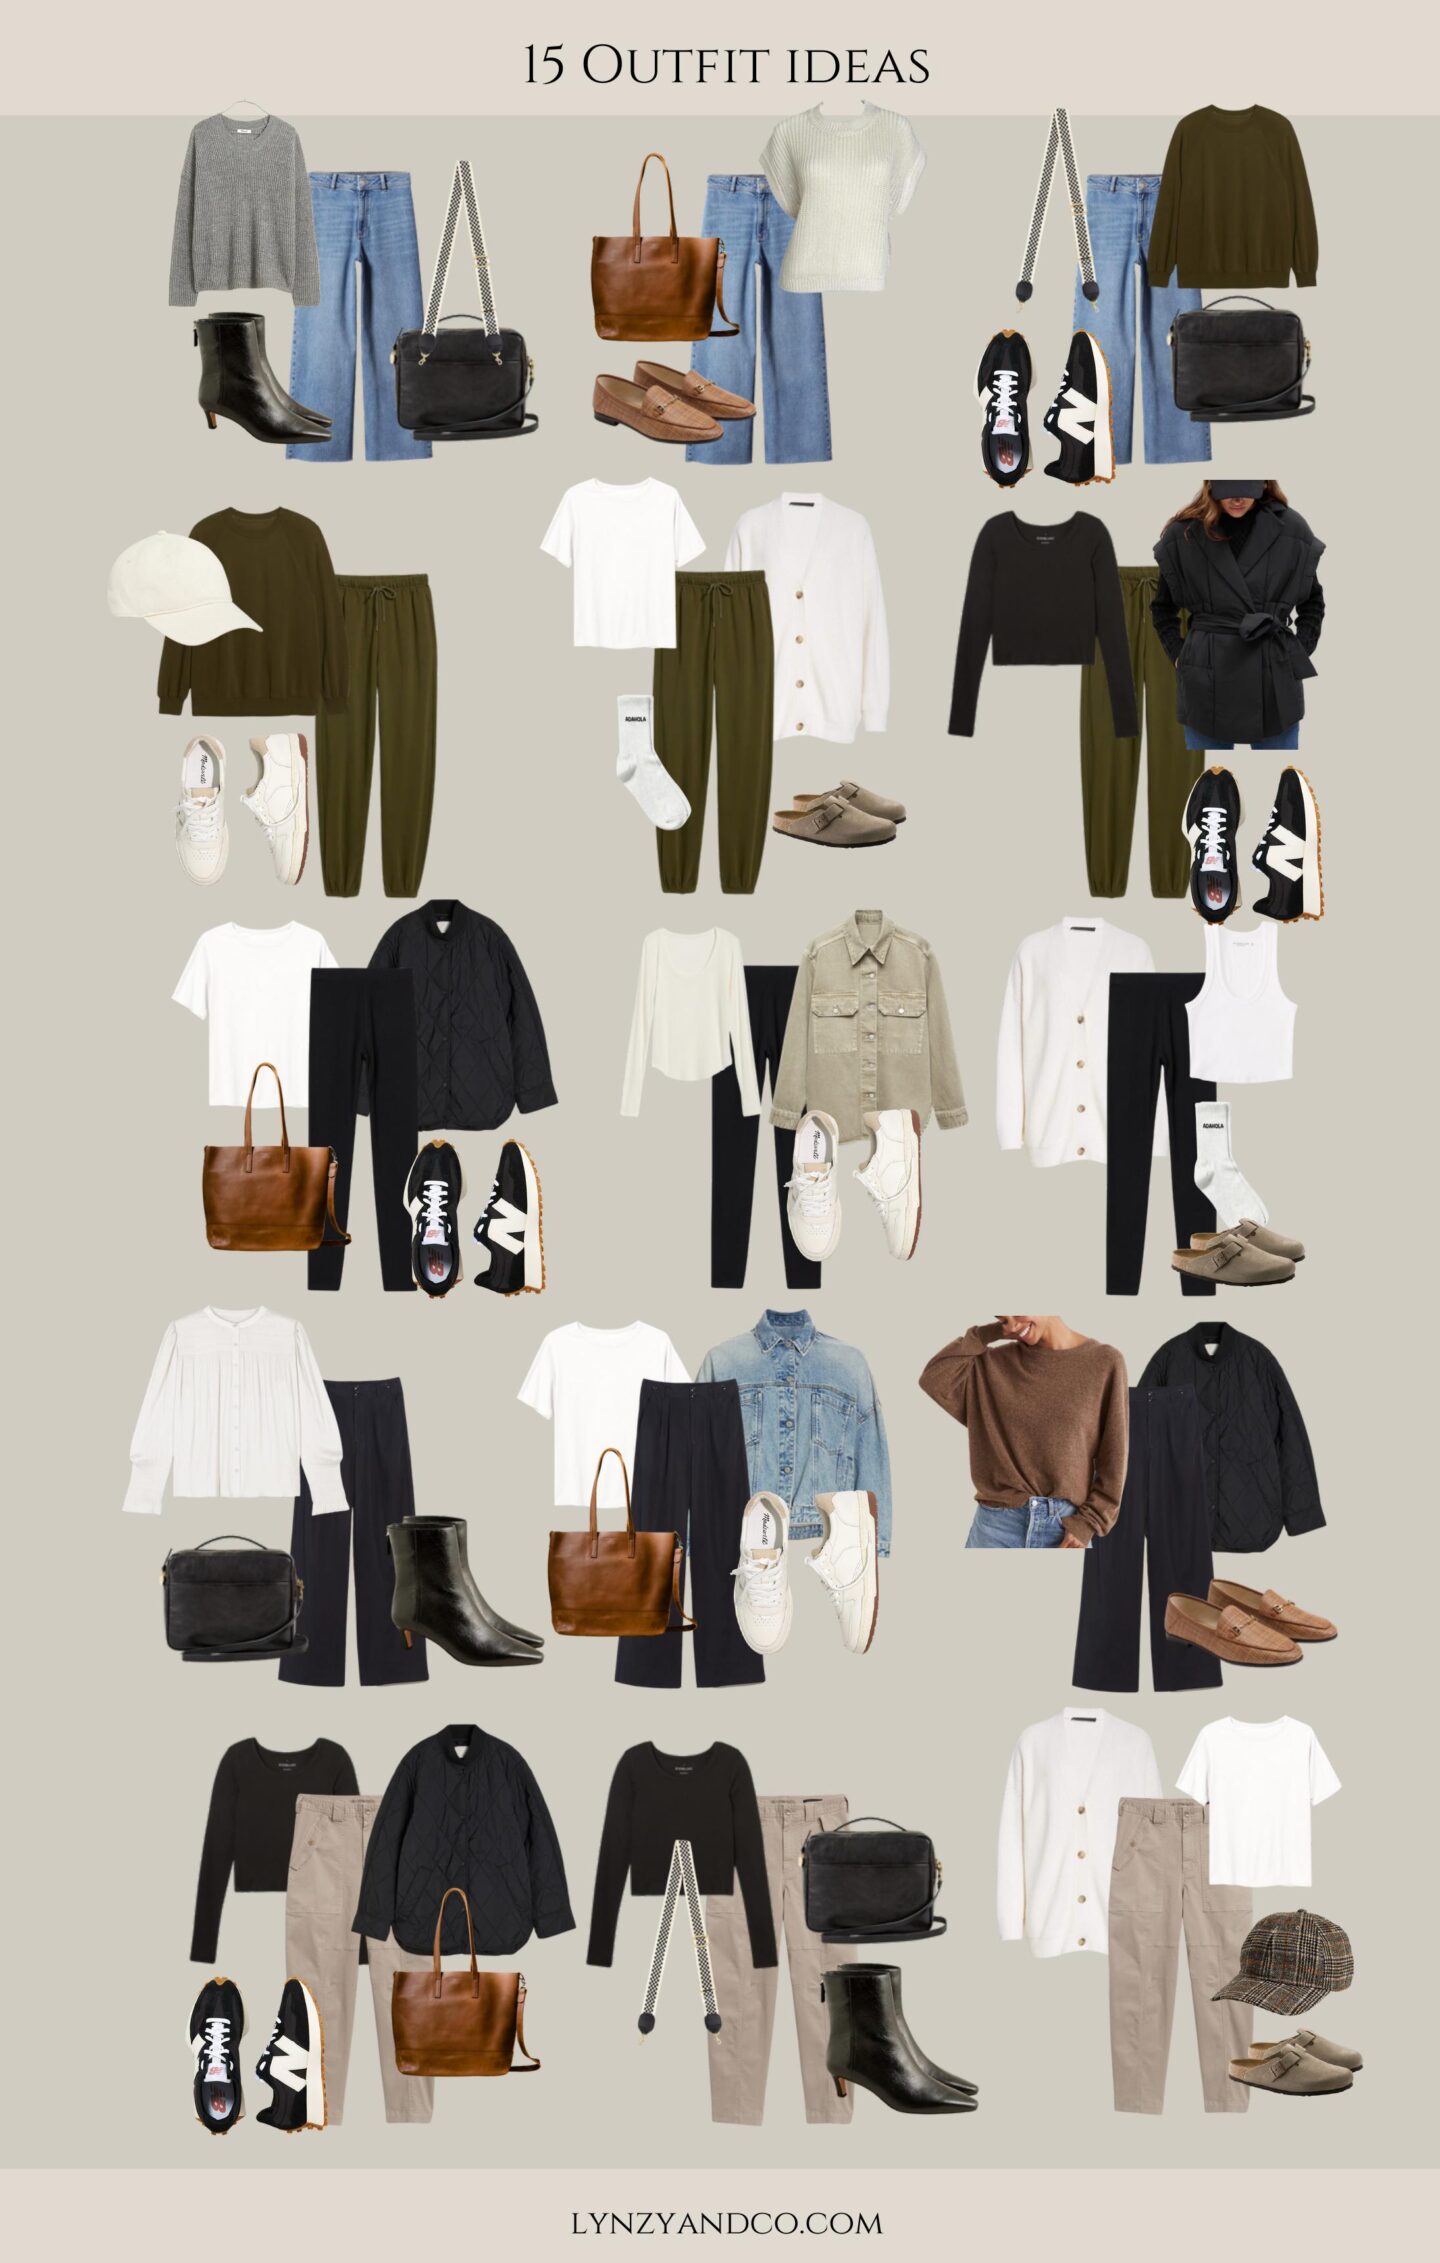 Fall Capsule Wardrobe: Affordable Mix and Match Fall Outfit Ideas